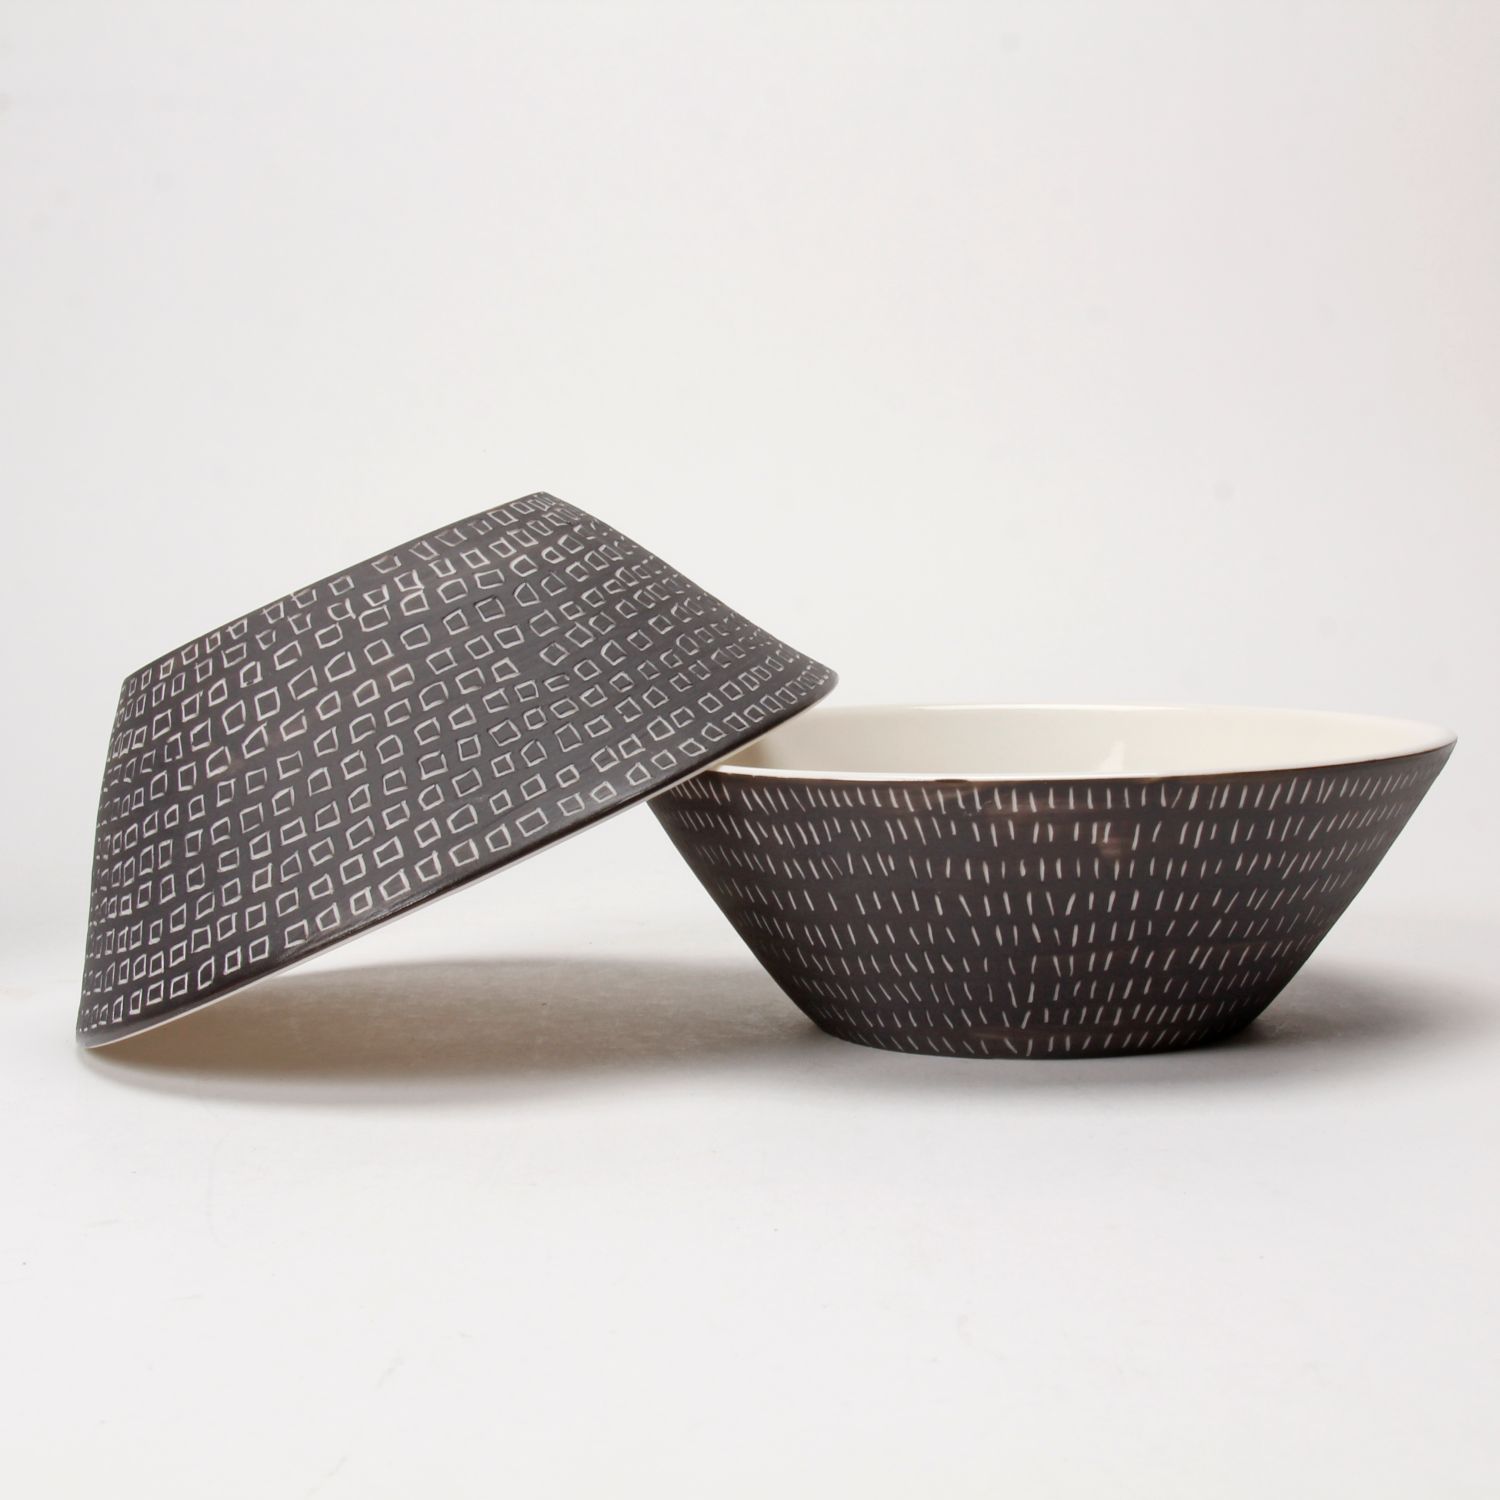 Cuir Ceramics: Black and White Bowl Product Image 5 of 5